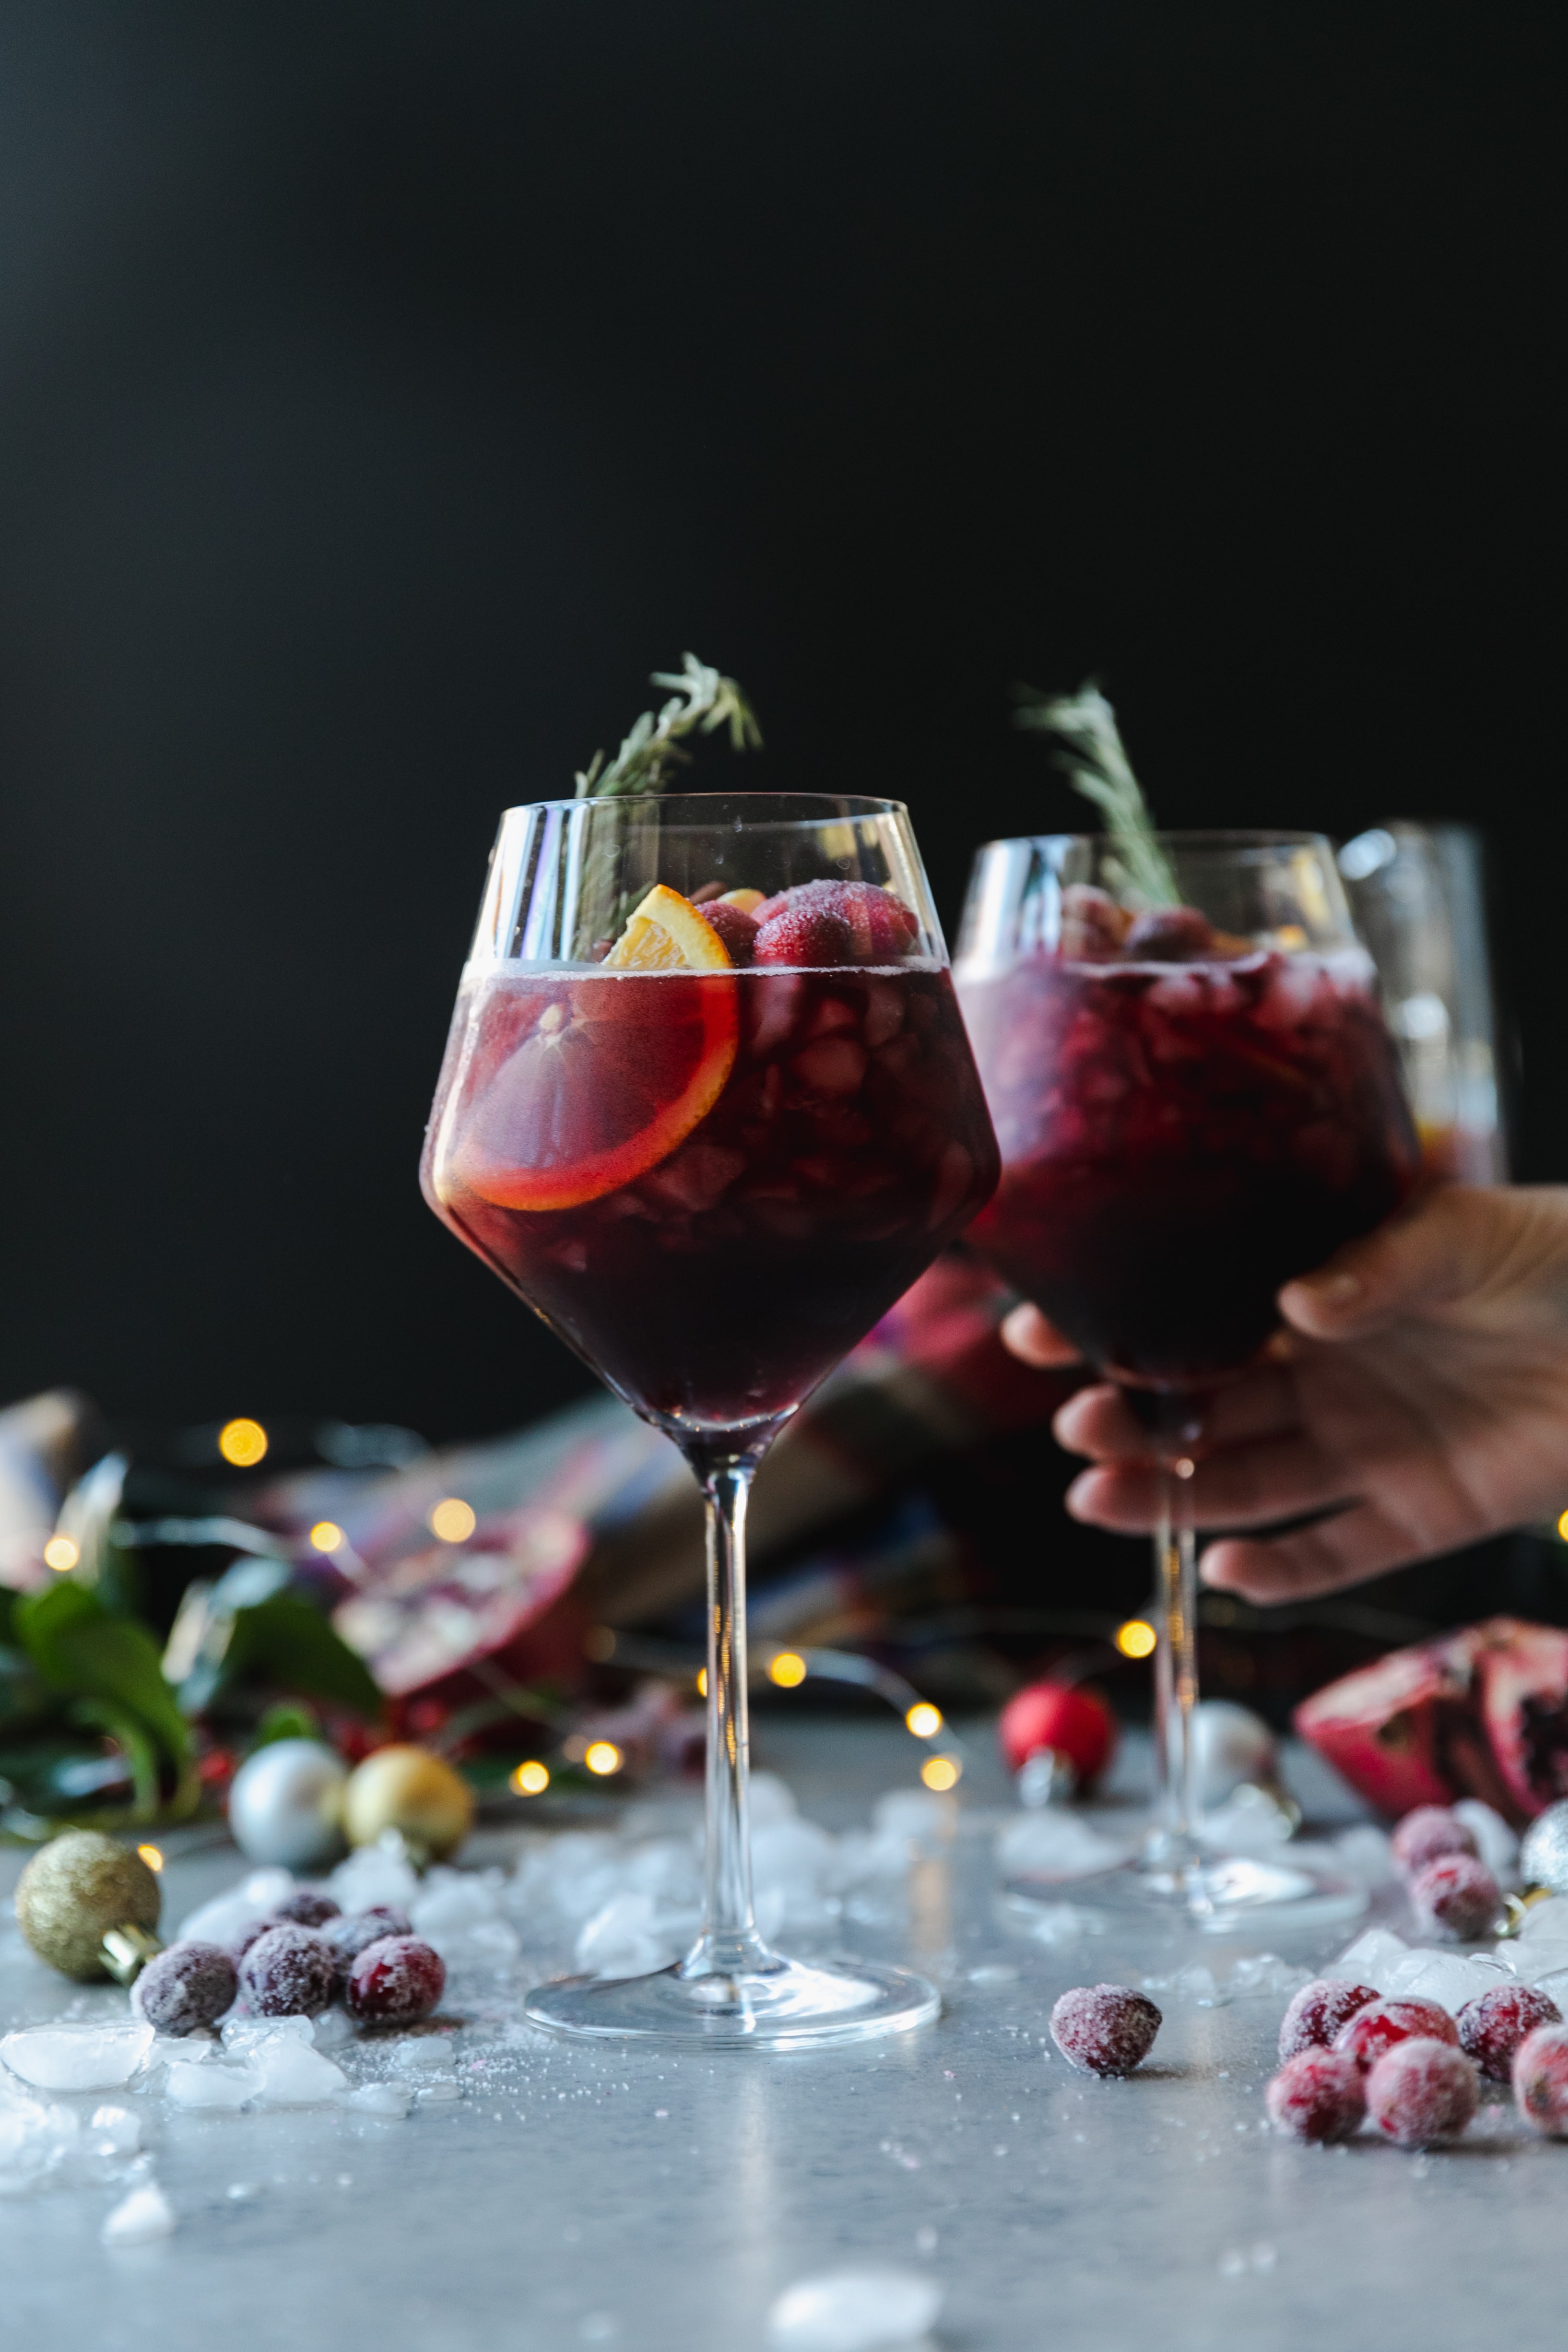 Forward facing shot of a wine glass filled with red sangria, garnished with a rosemary sprig, with another glass behind it with a hand reaching out to pick it up, with crushed ice, christmas ornaments, a plaid scarf, and twinkle lights in the background